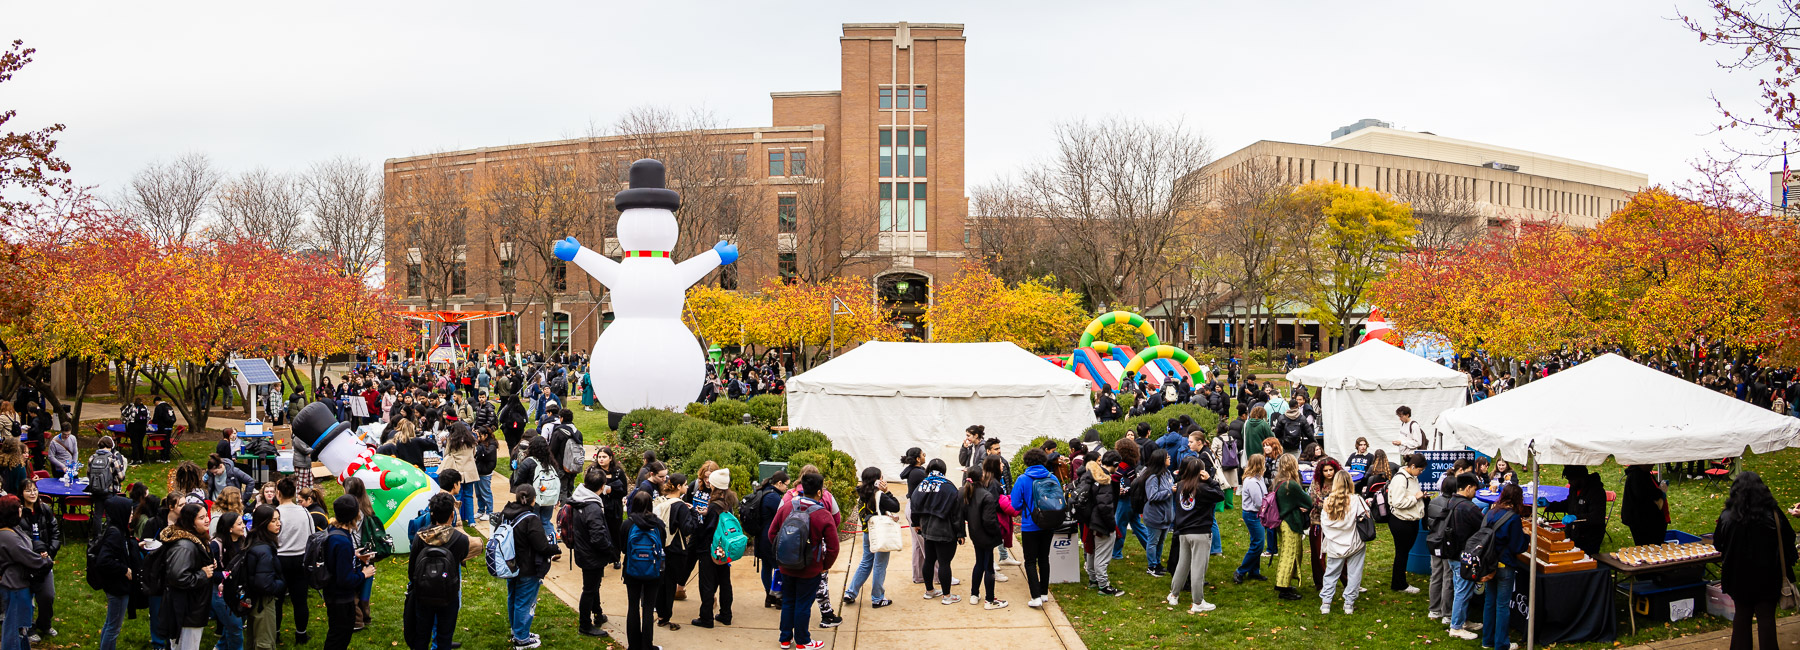 Thousands turned out for the annual event. (Photo by Jeff Carrion / DePaul University) 